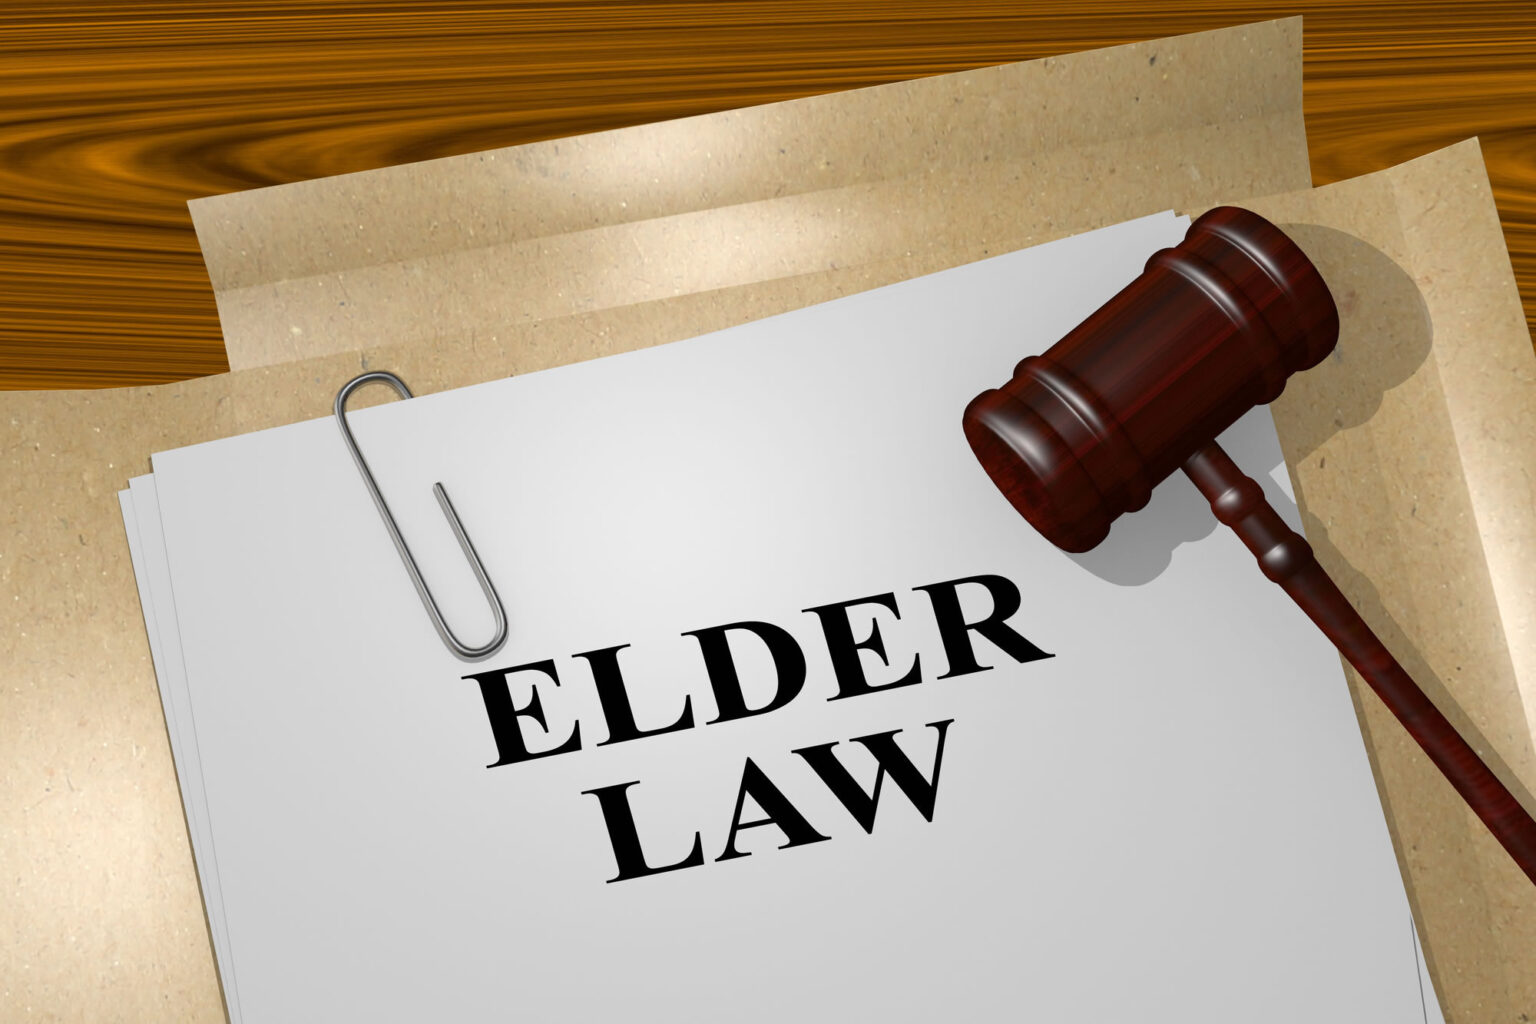 There is a growing movement to recognize the legal rights of the elderly. Here's everything you need to know about elder law.